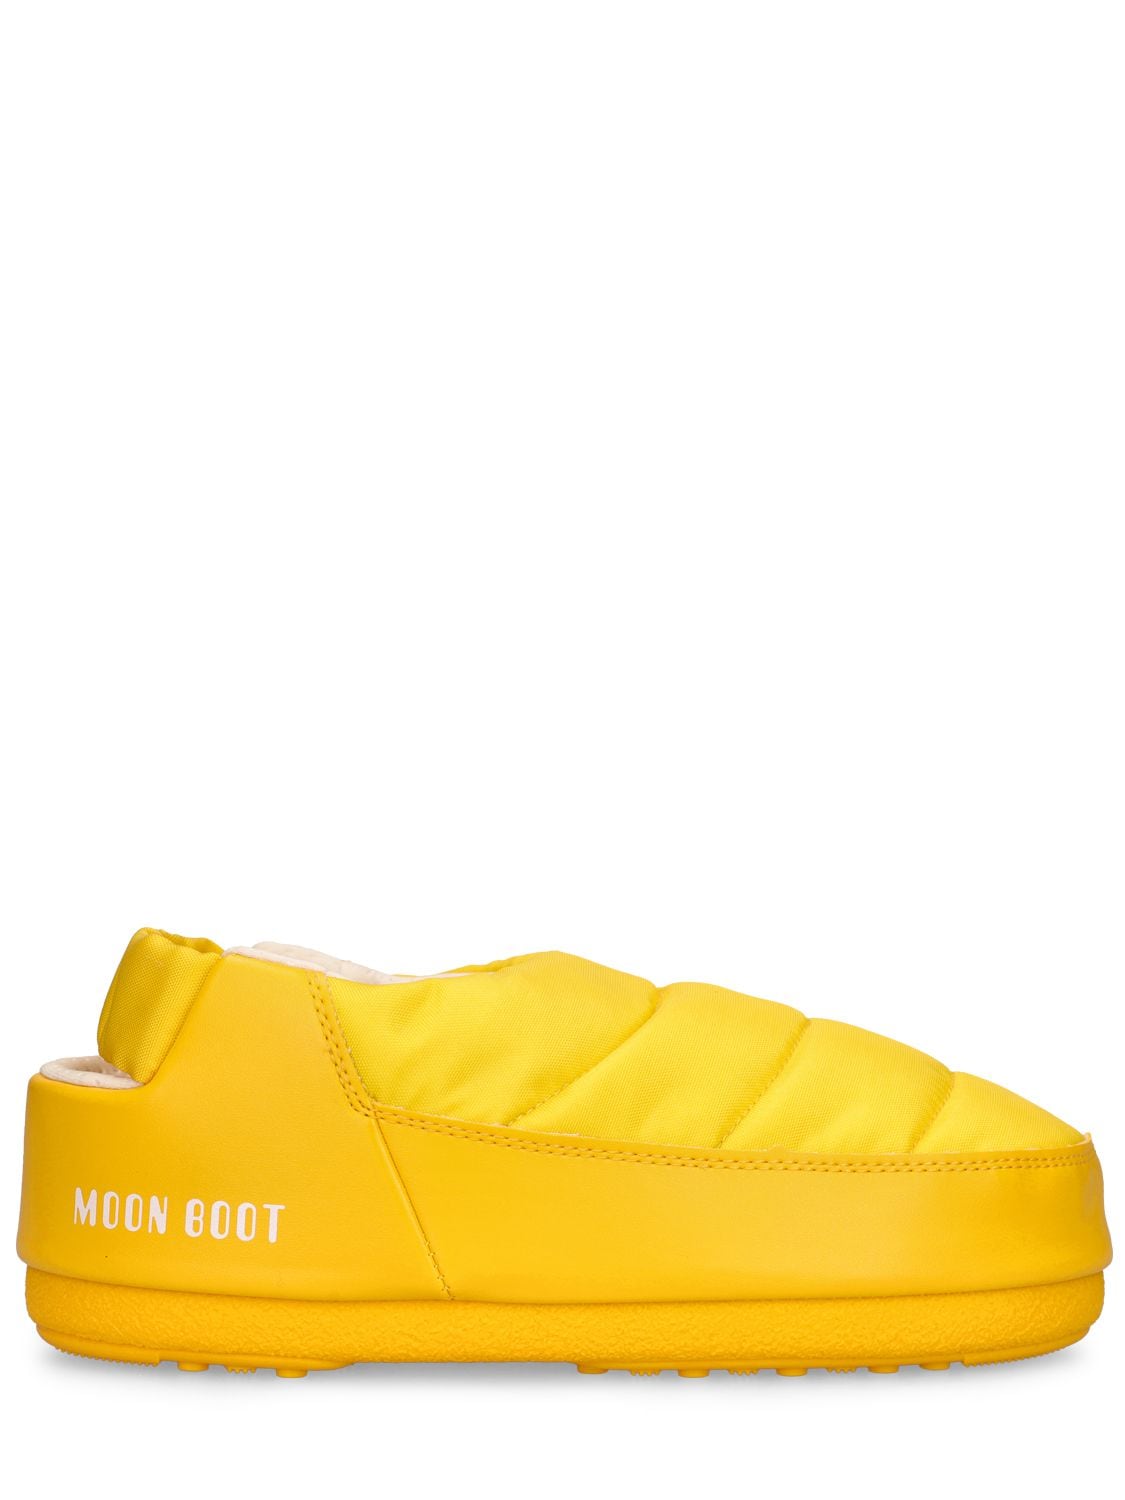 Moon Boot Sandal Band S In Yellow